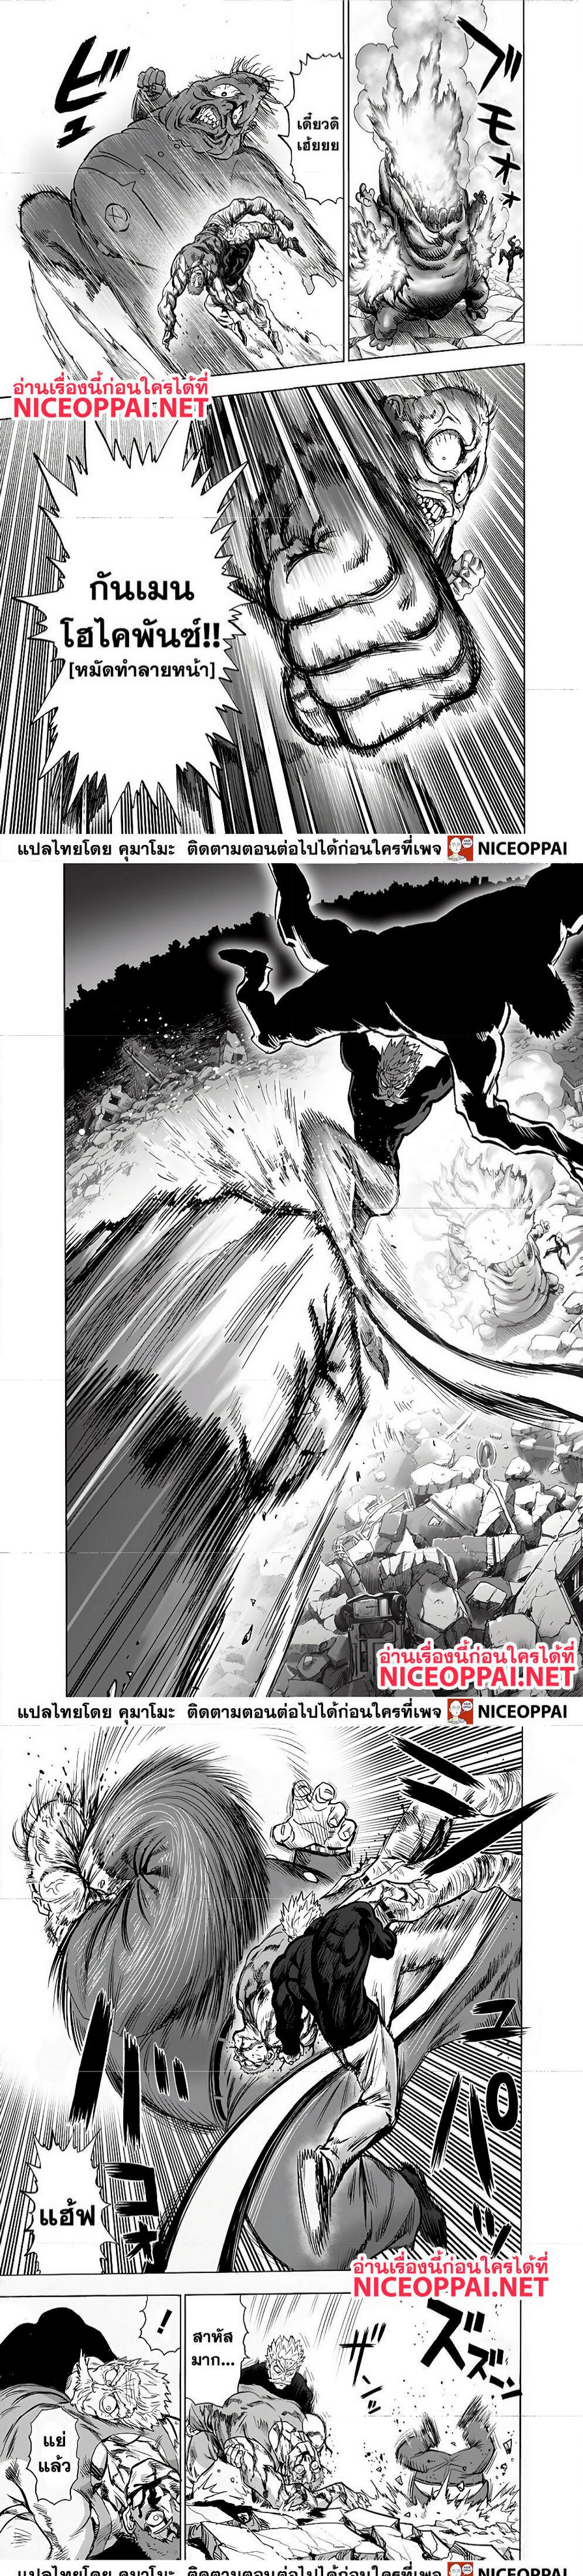 One Punch Man144.2 (3)